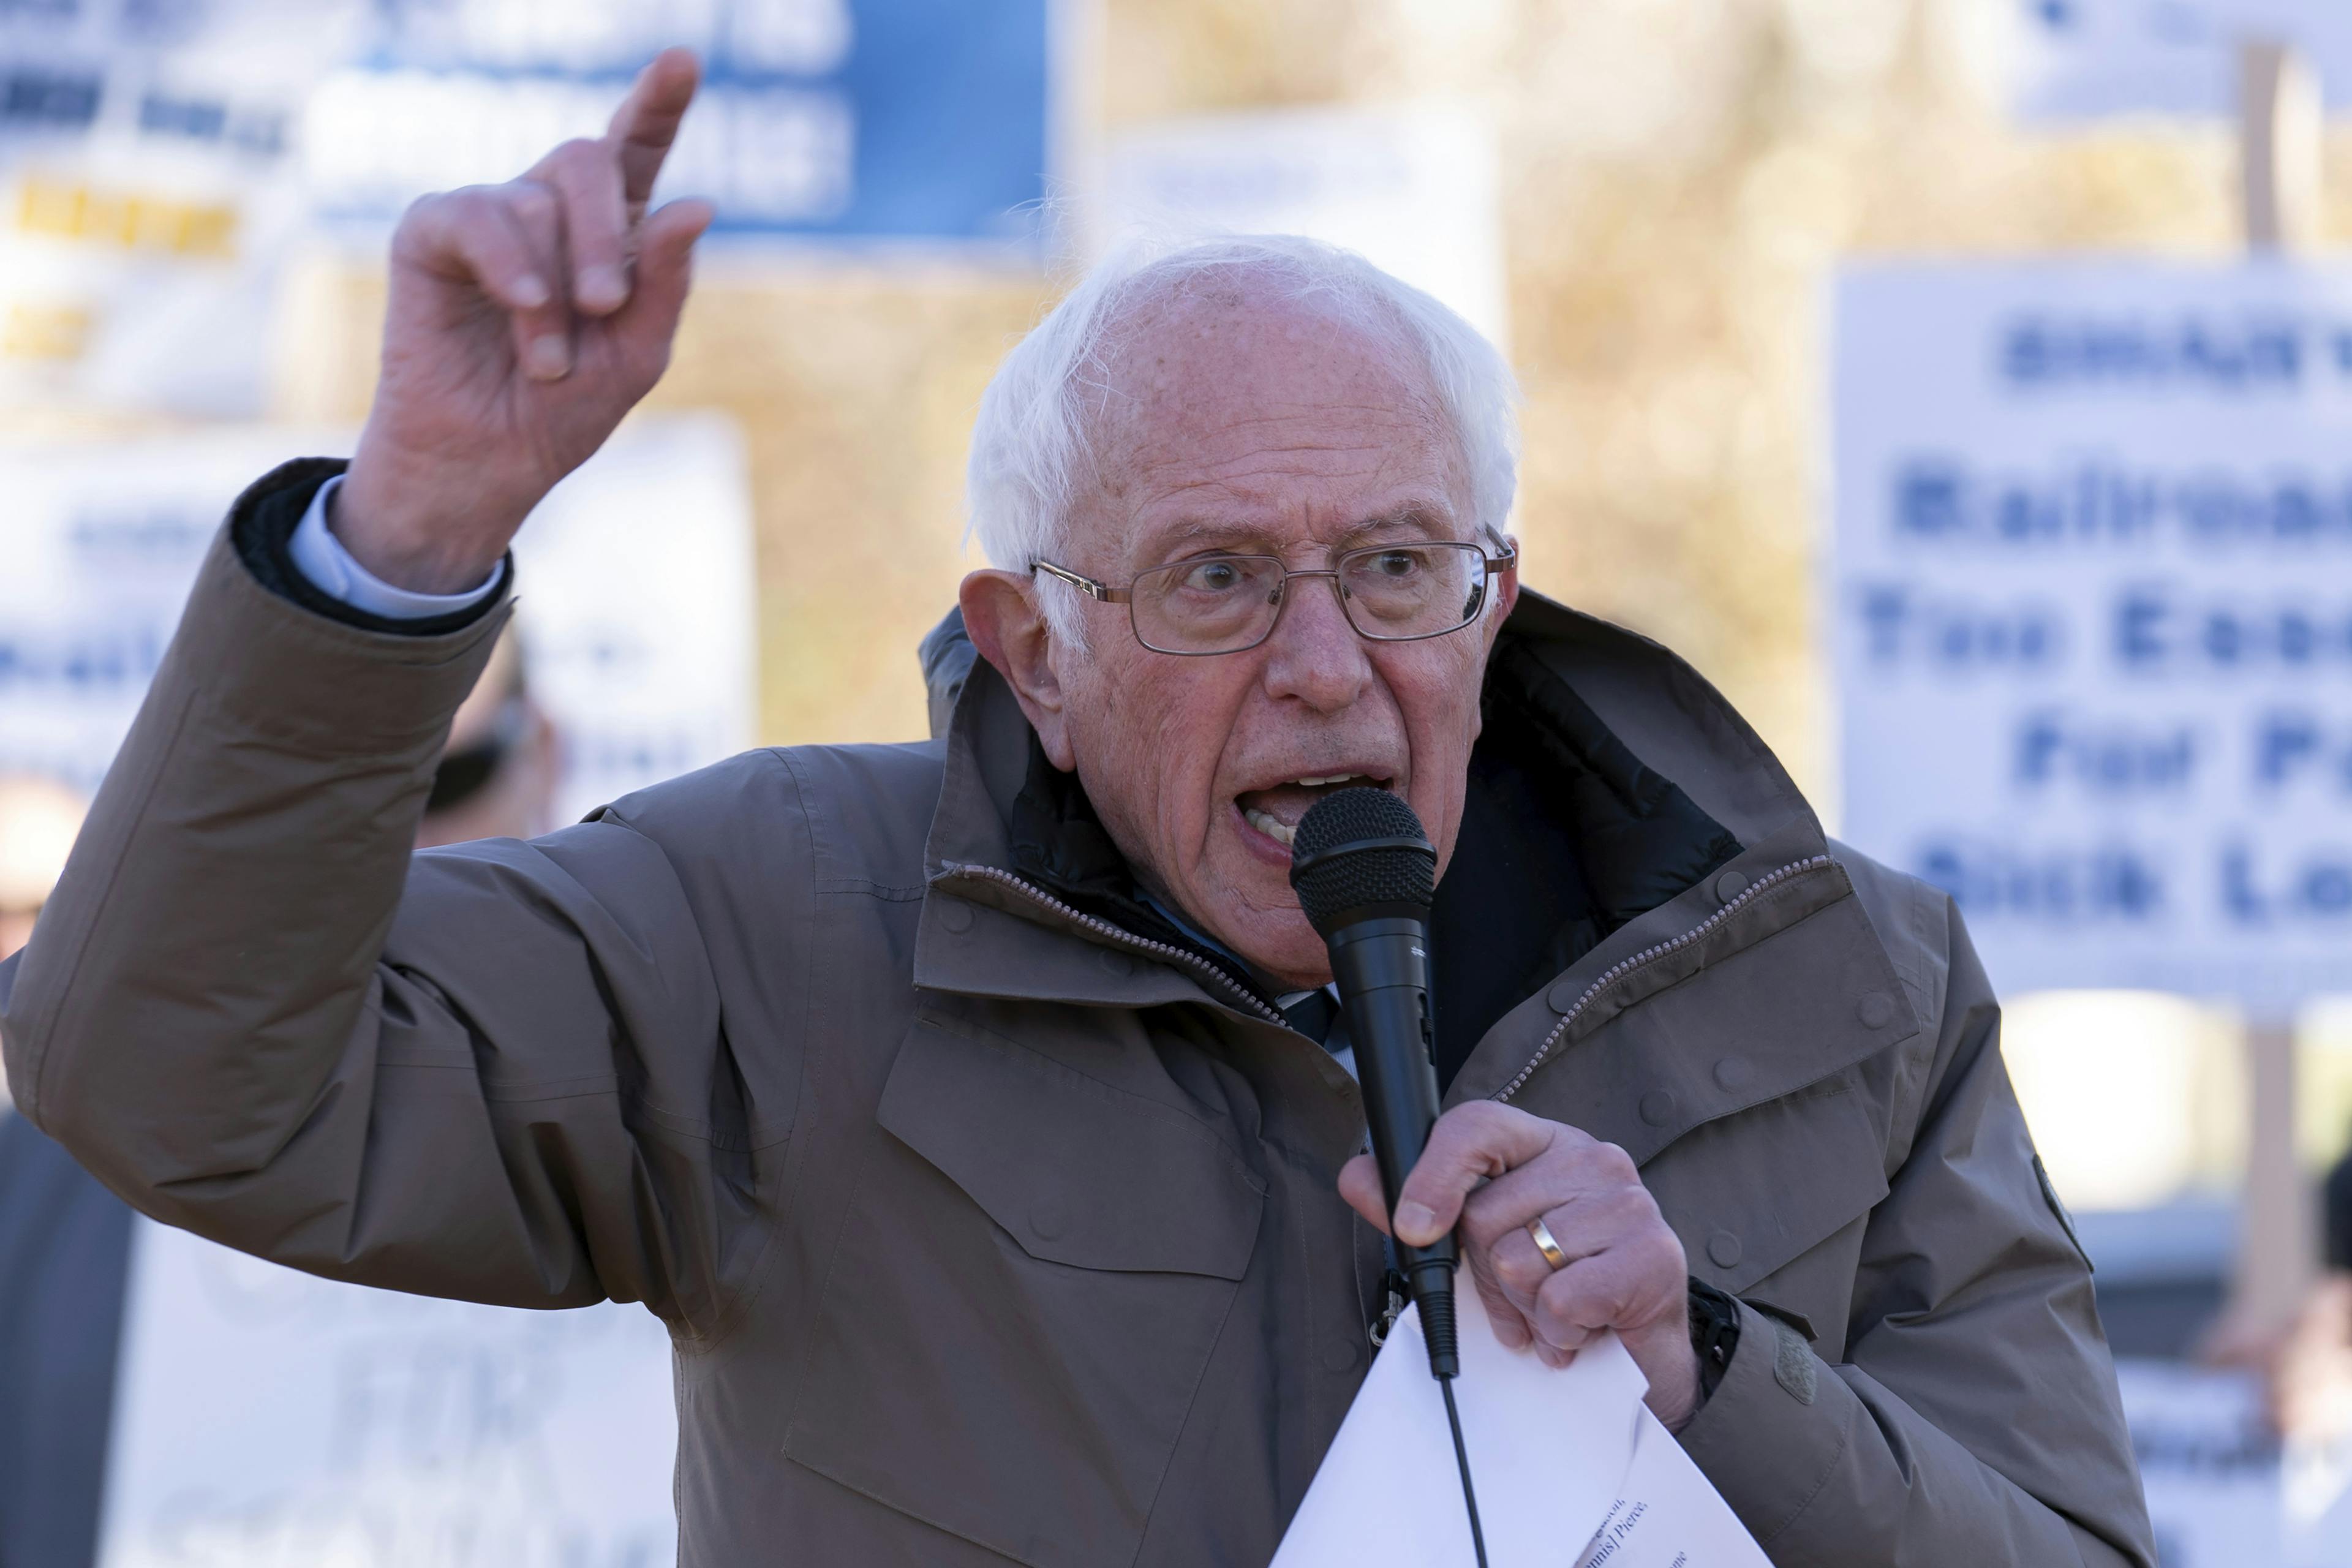 Senator Sanders speaks during a rail union workers rally outside of the U.S. Capitol. Dec. 13, 2022.